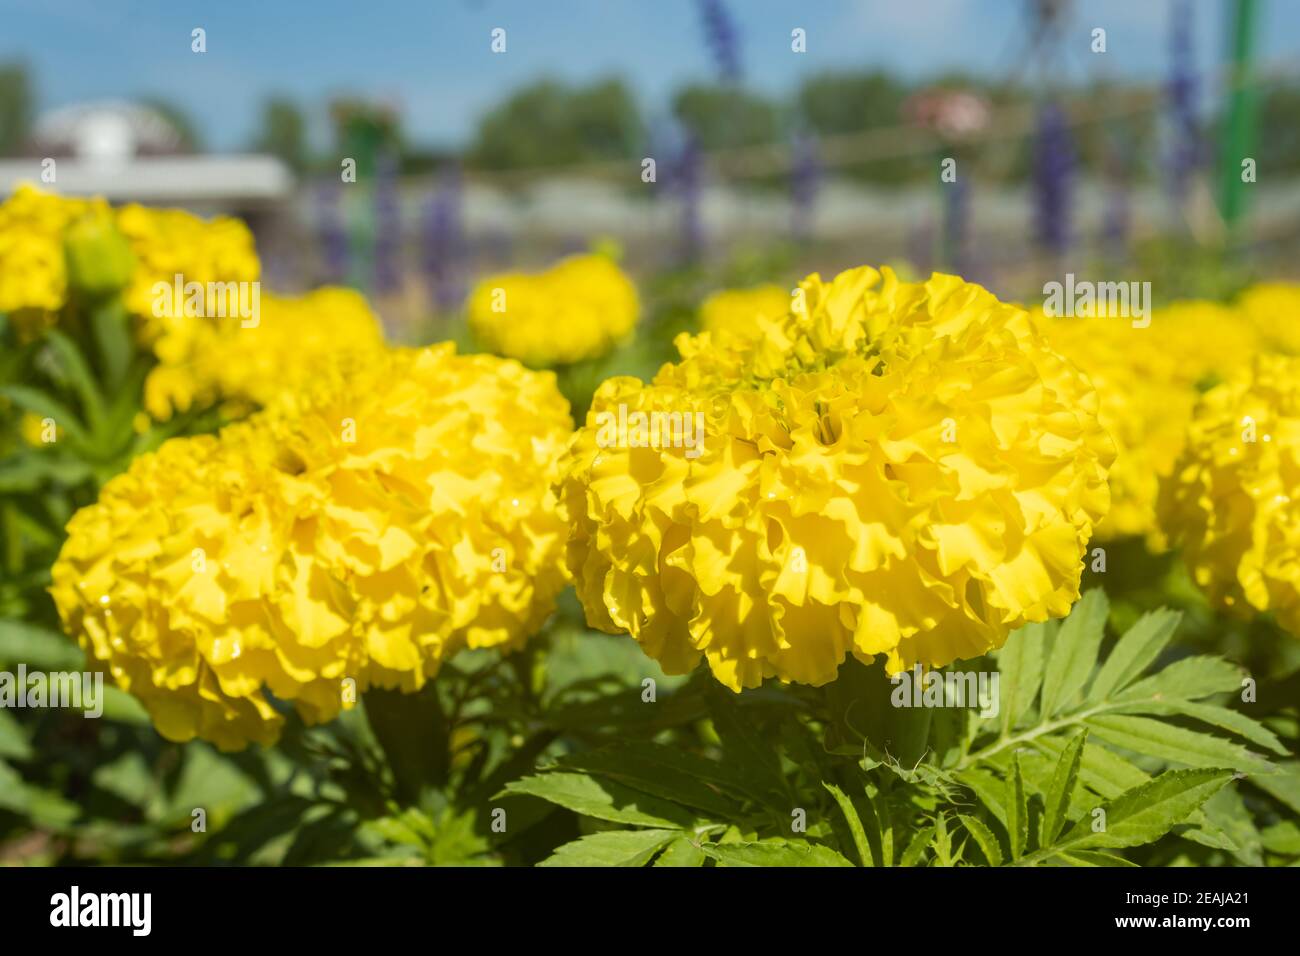 Yellow Marigold Flower with Green Leaves in Garden Stock Photo